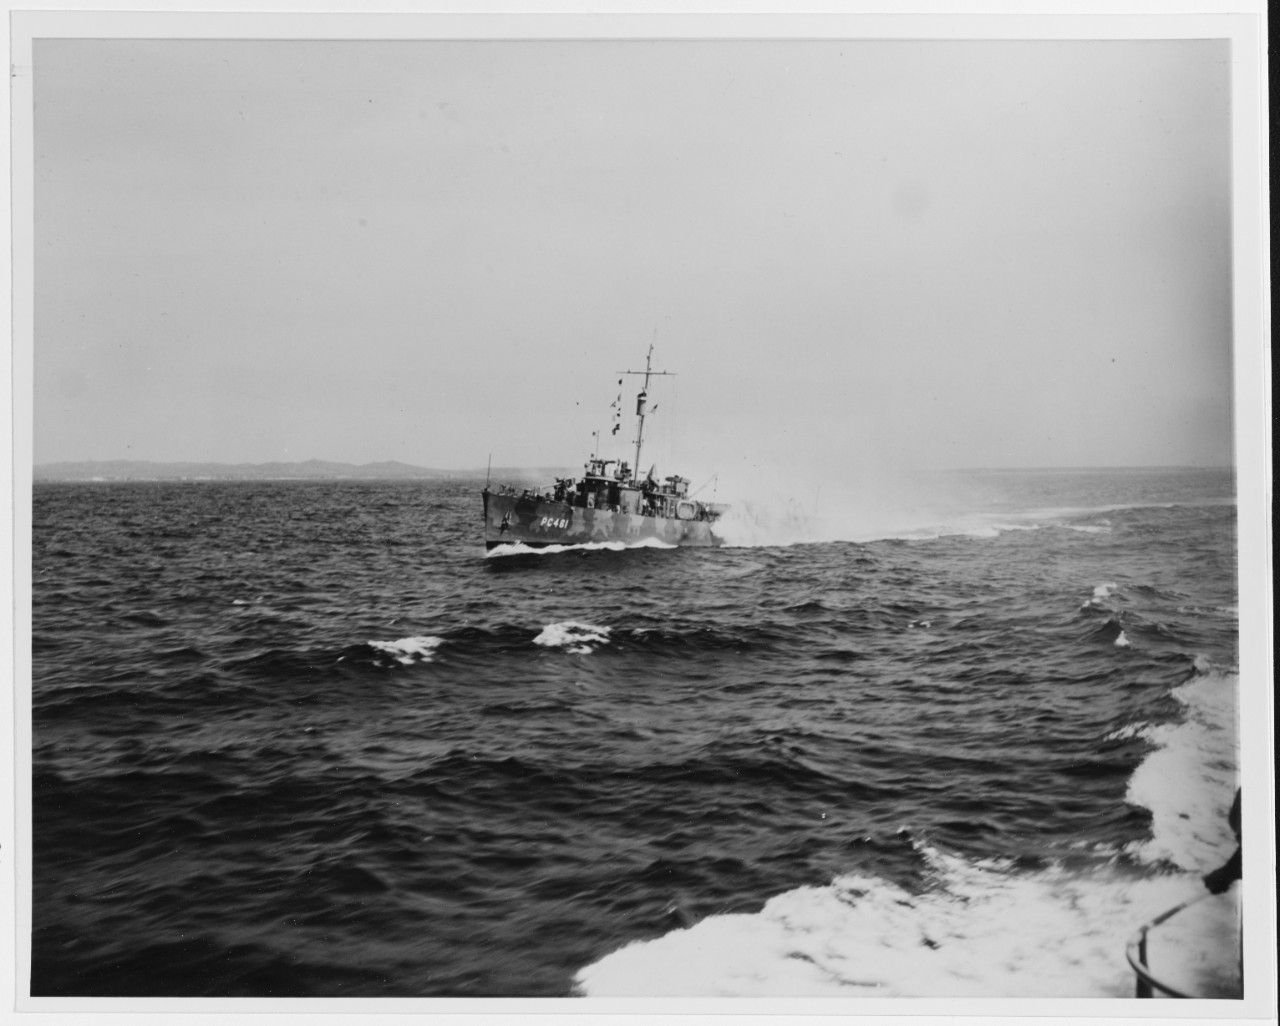 USS PC-461 (later named BLUFFTON)